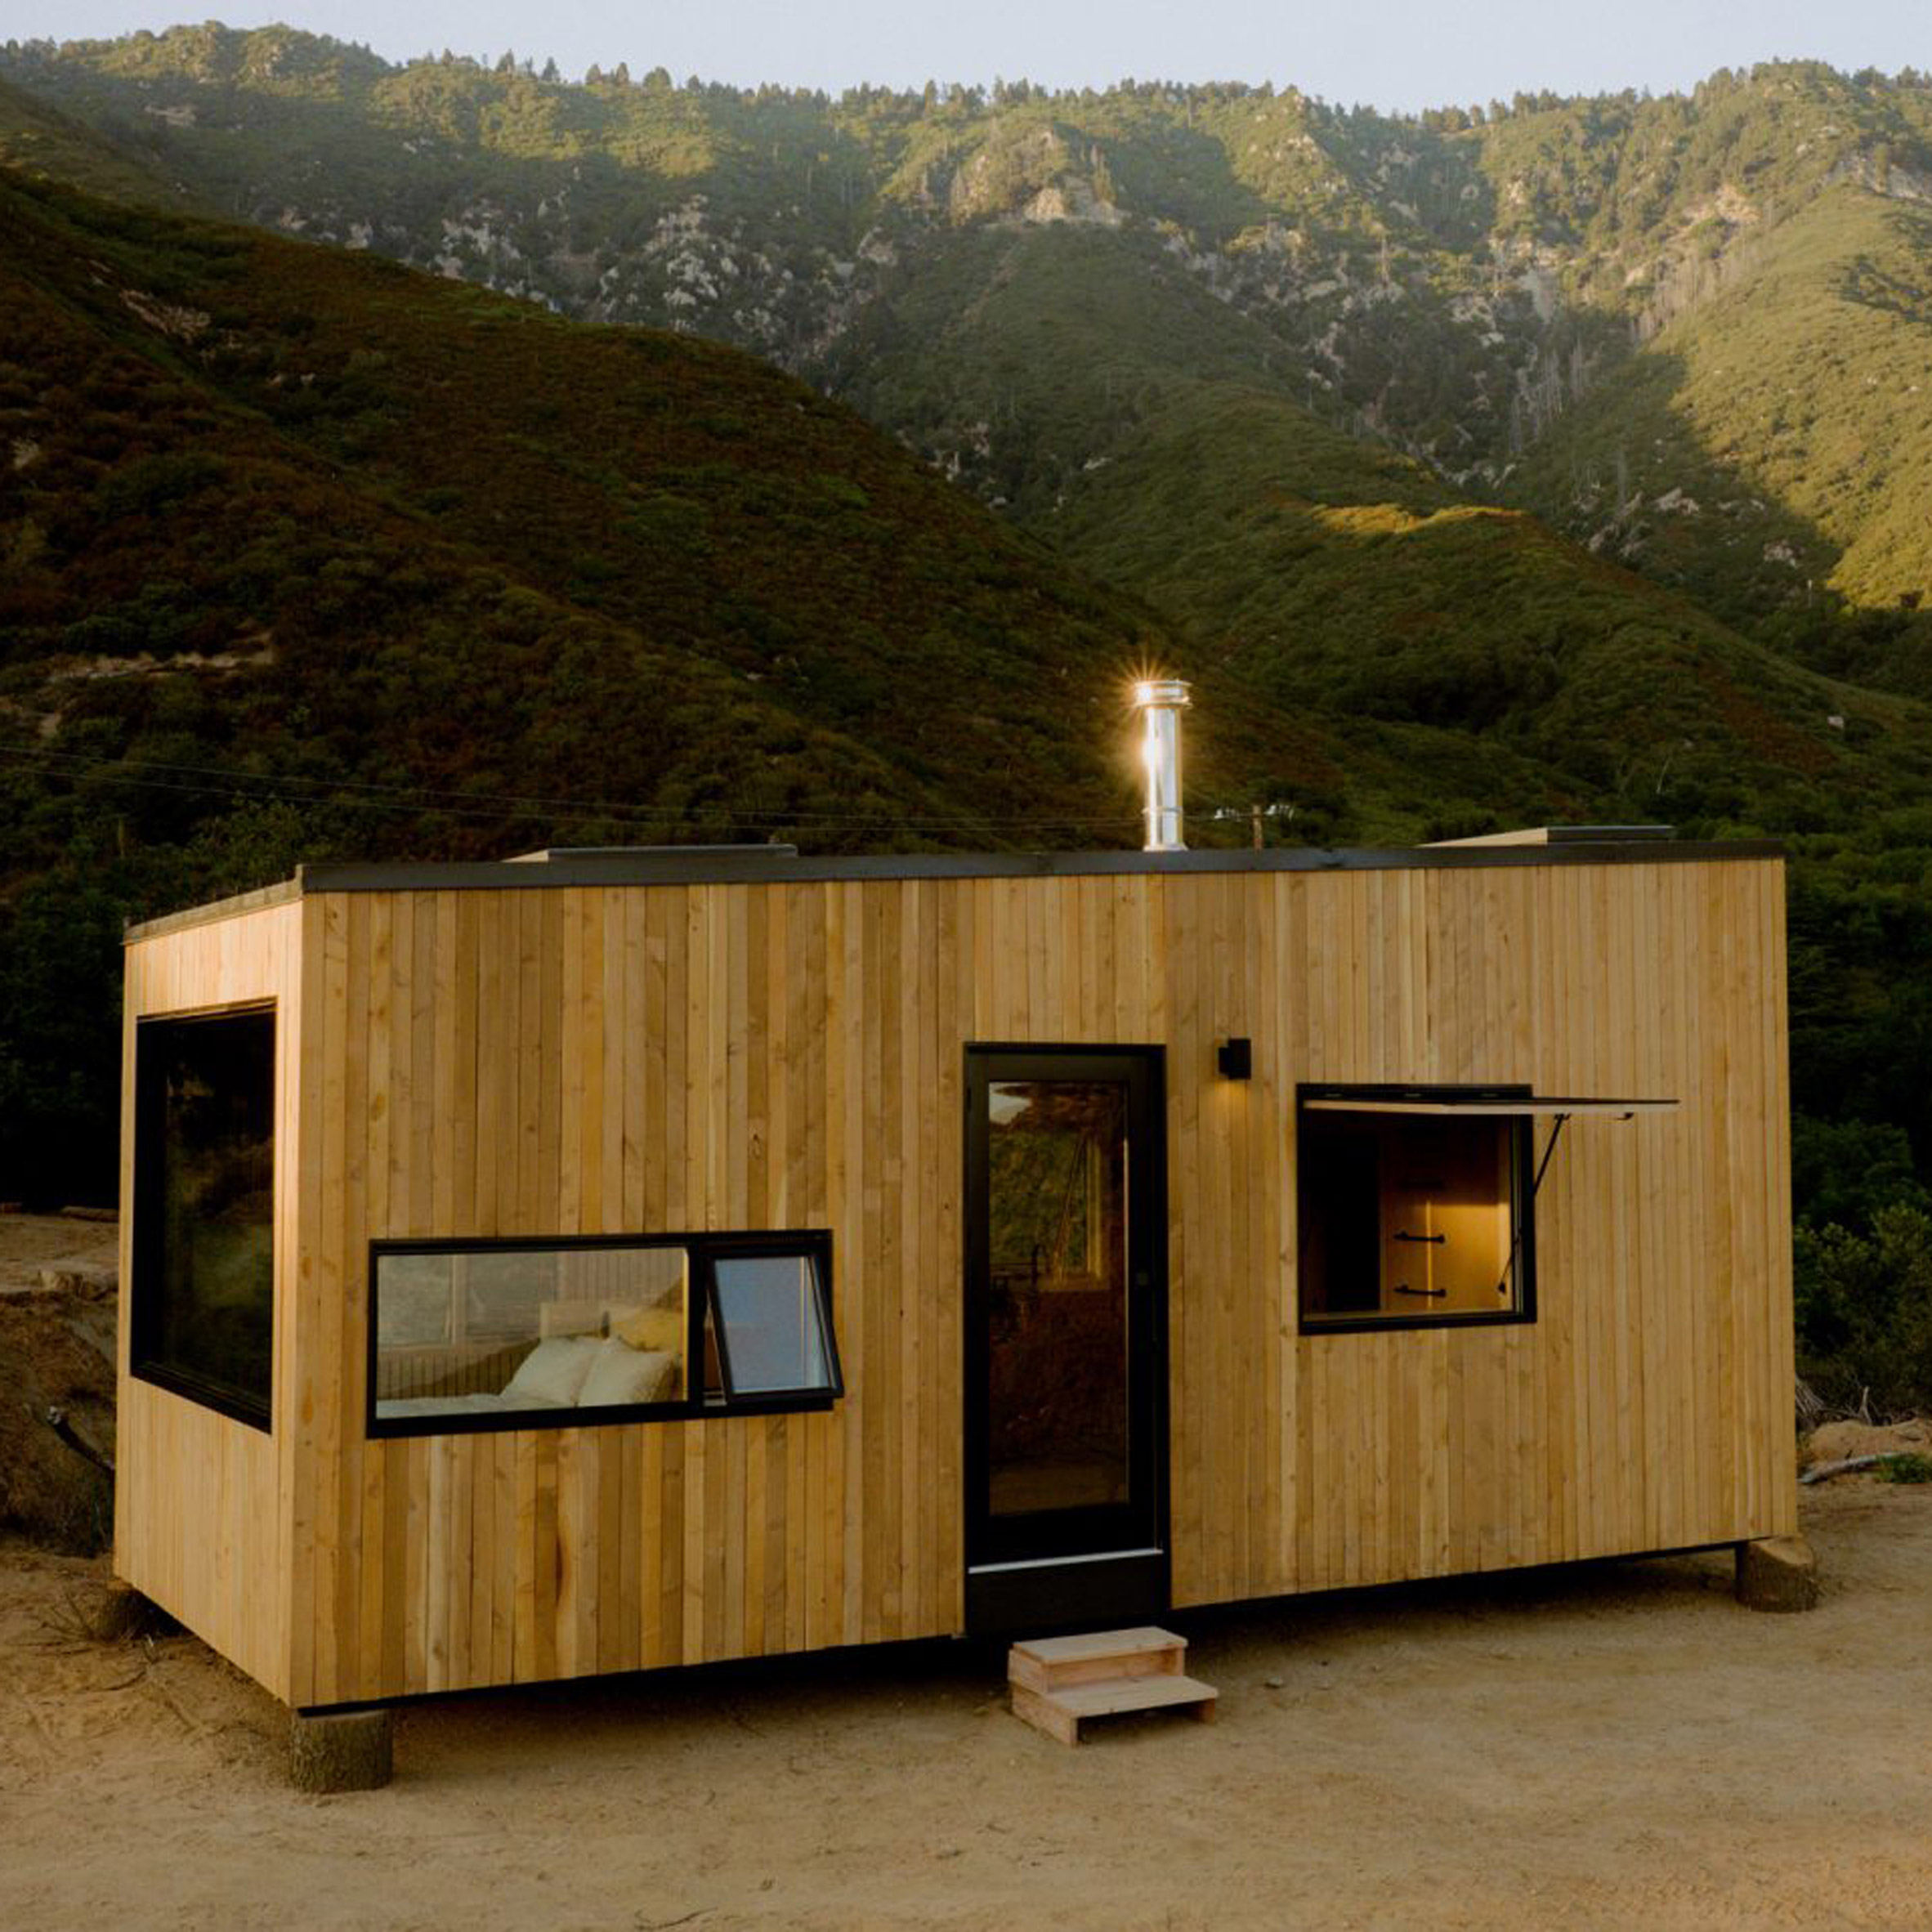 Image of a wooden glamping cabin with views across a mountainous setting